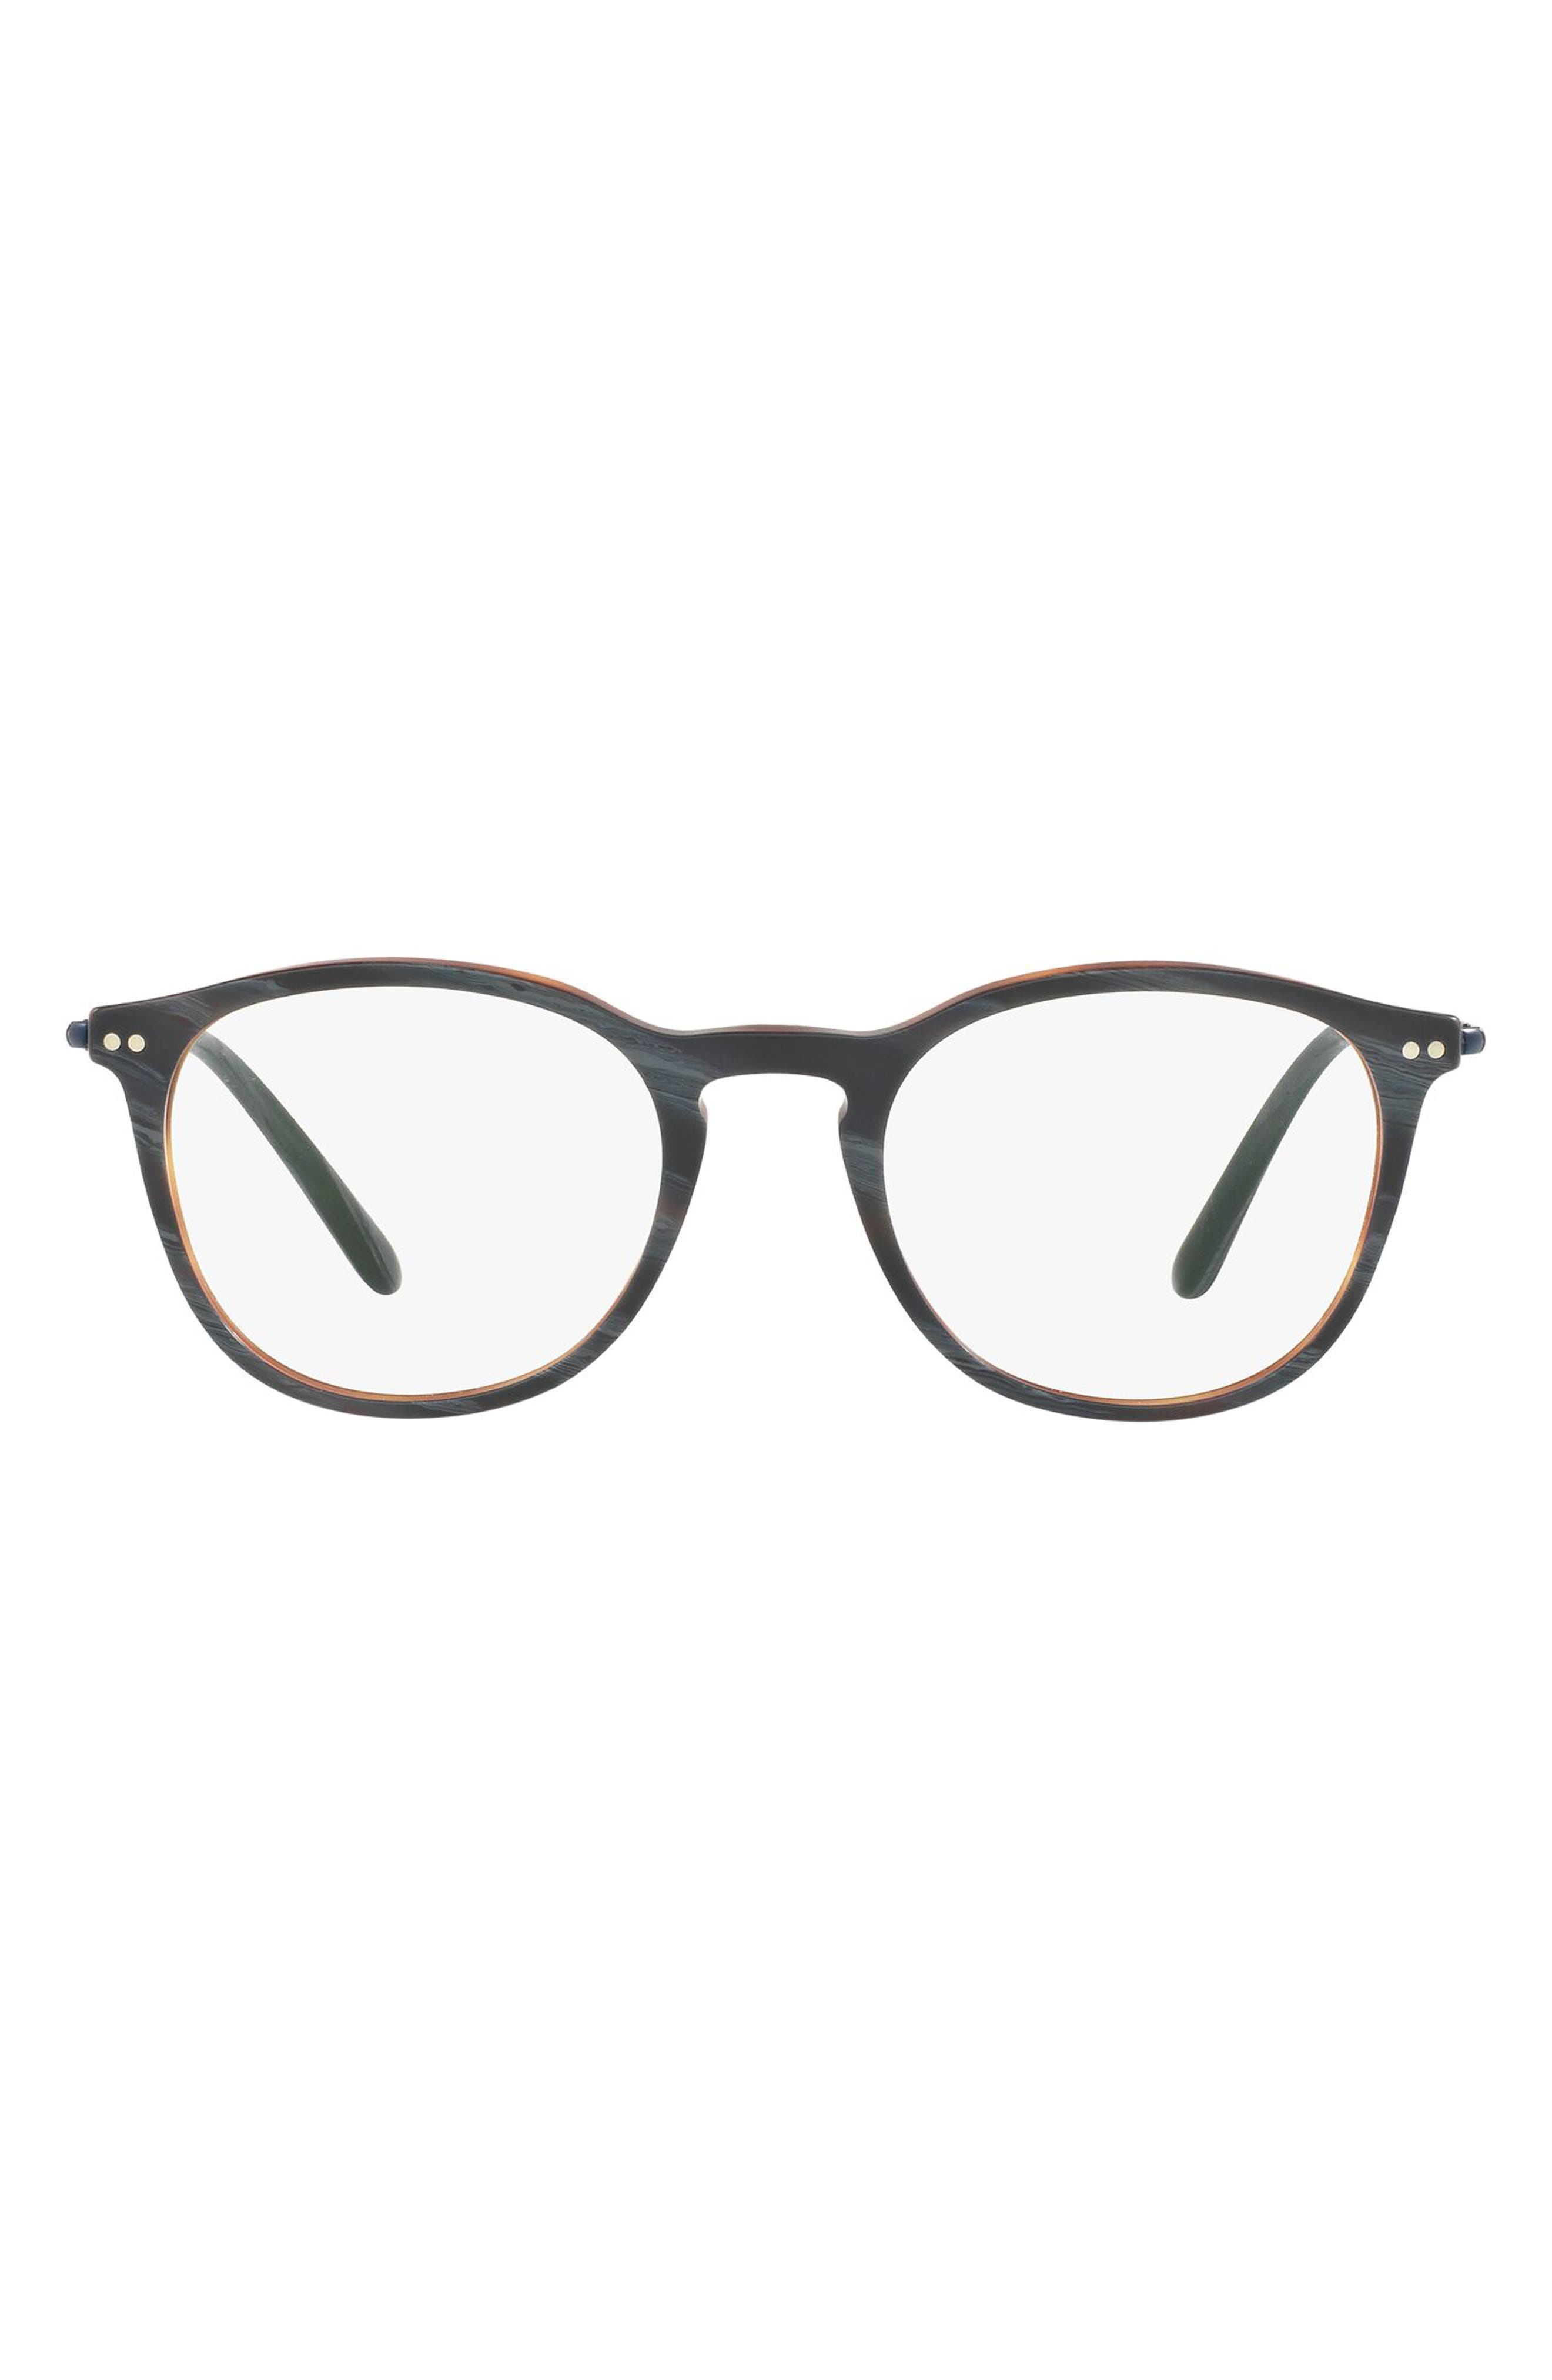 Giorgio Armani 52mm Round Optical Glasses in Matte Grey Horn/Demo Lens at Nordstrom